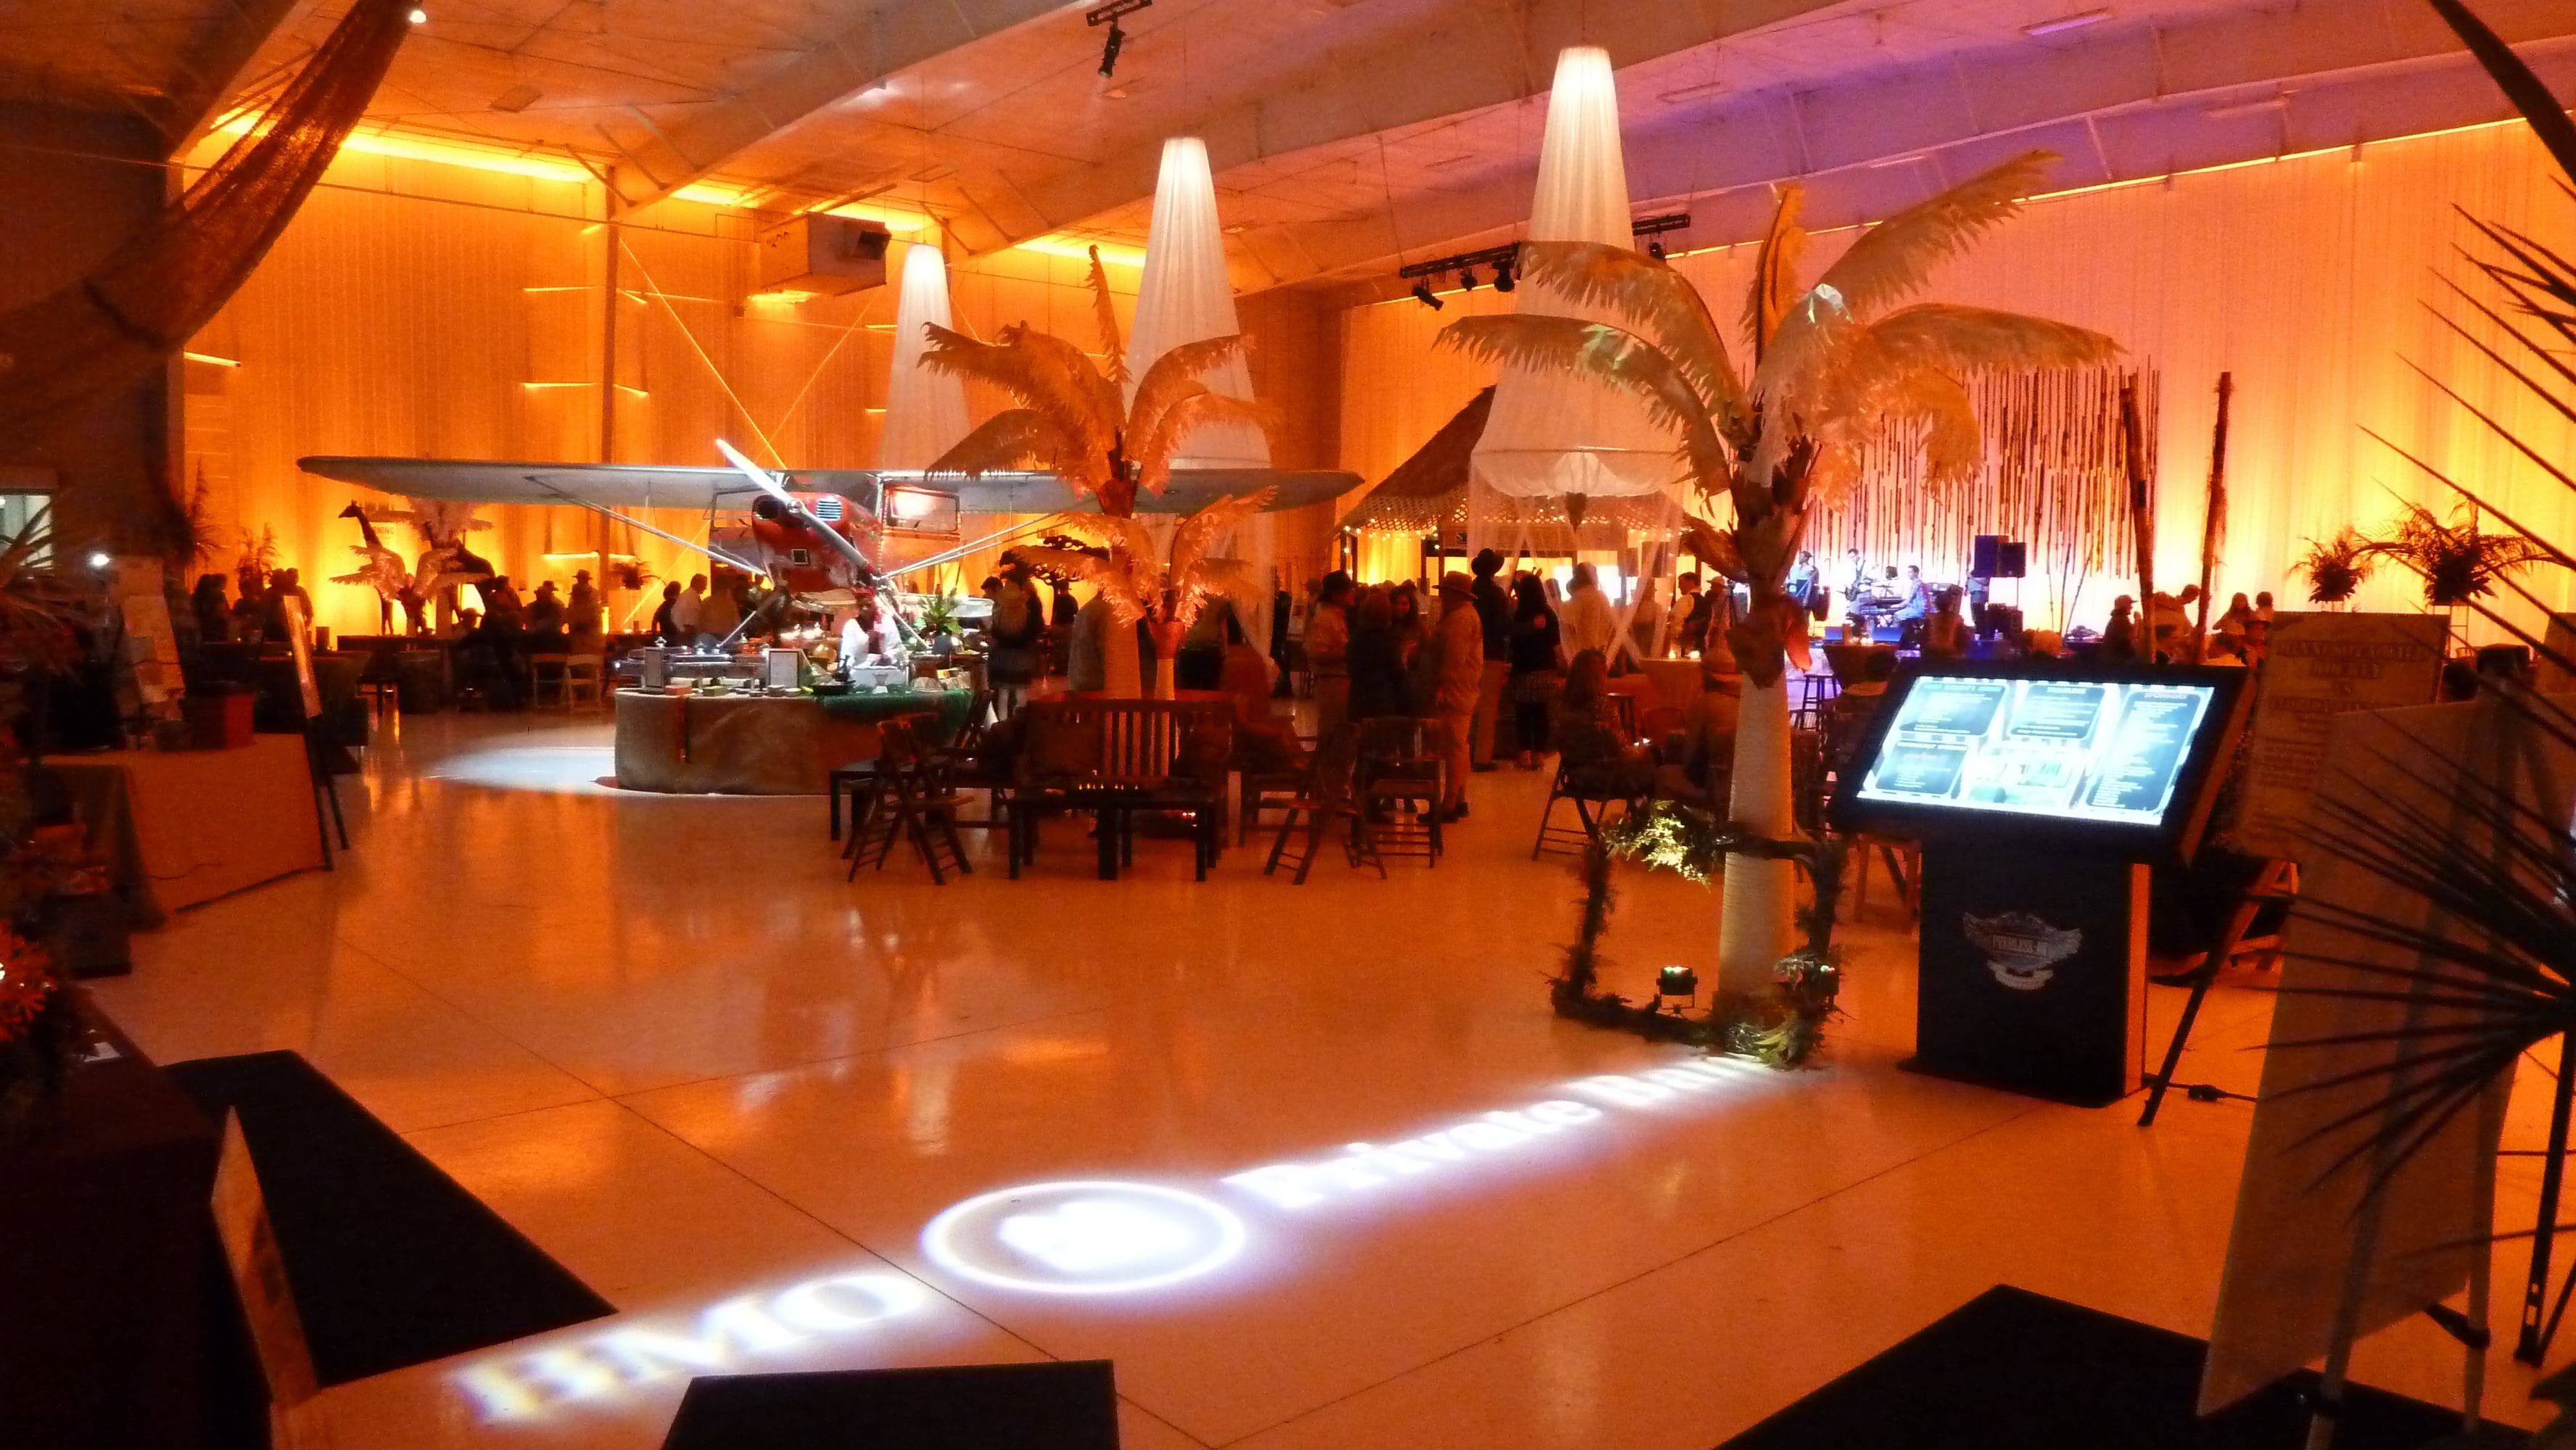 African Sahara sunset themed party in an airport Hanger. Decor by Event Lab, Lighting by Duluth Event Lighting.